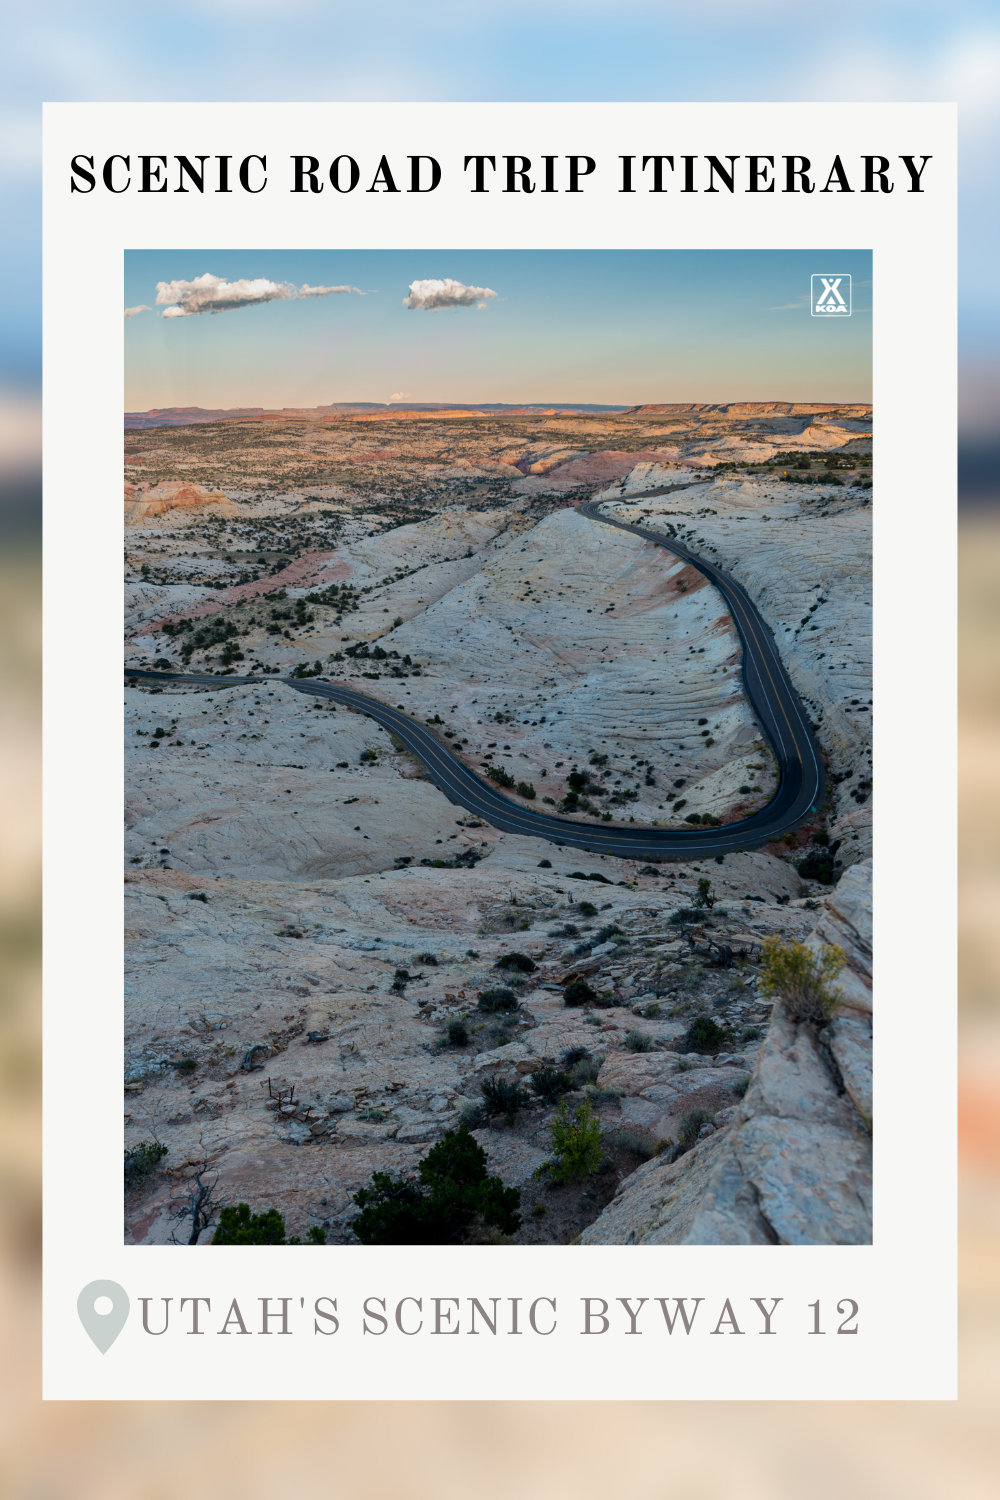 Check out this complete guide to exploring Utah's Scenic Byway 12. Make your road trip through Utah unforgettable by staying with Kampgrounds of America.